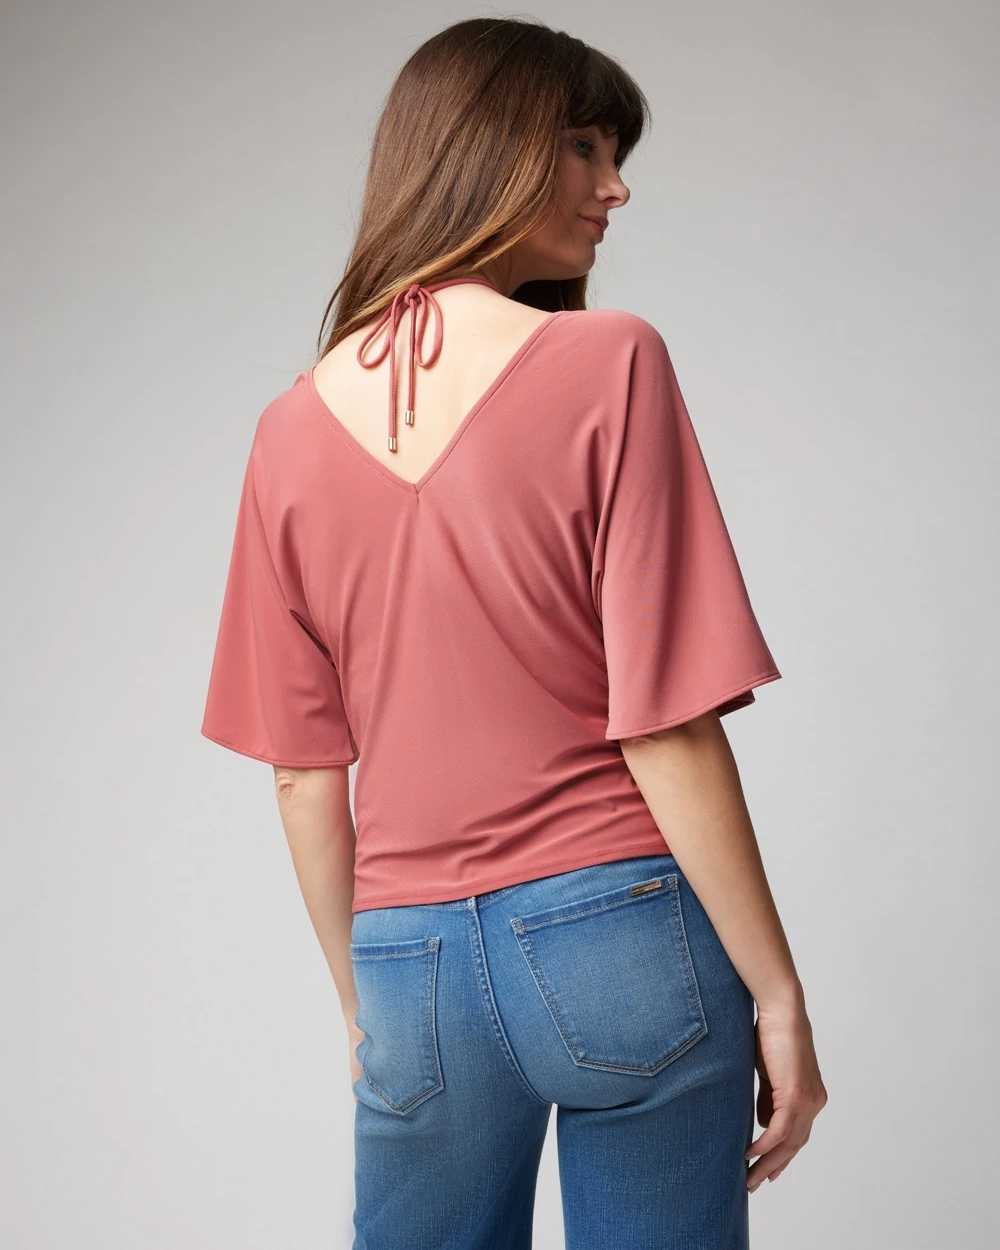 Matte Jersey Ruched Front Top click to view larger image.